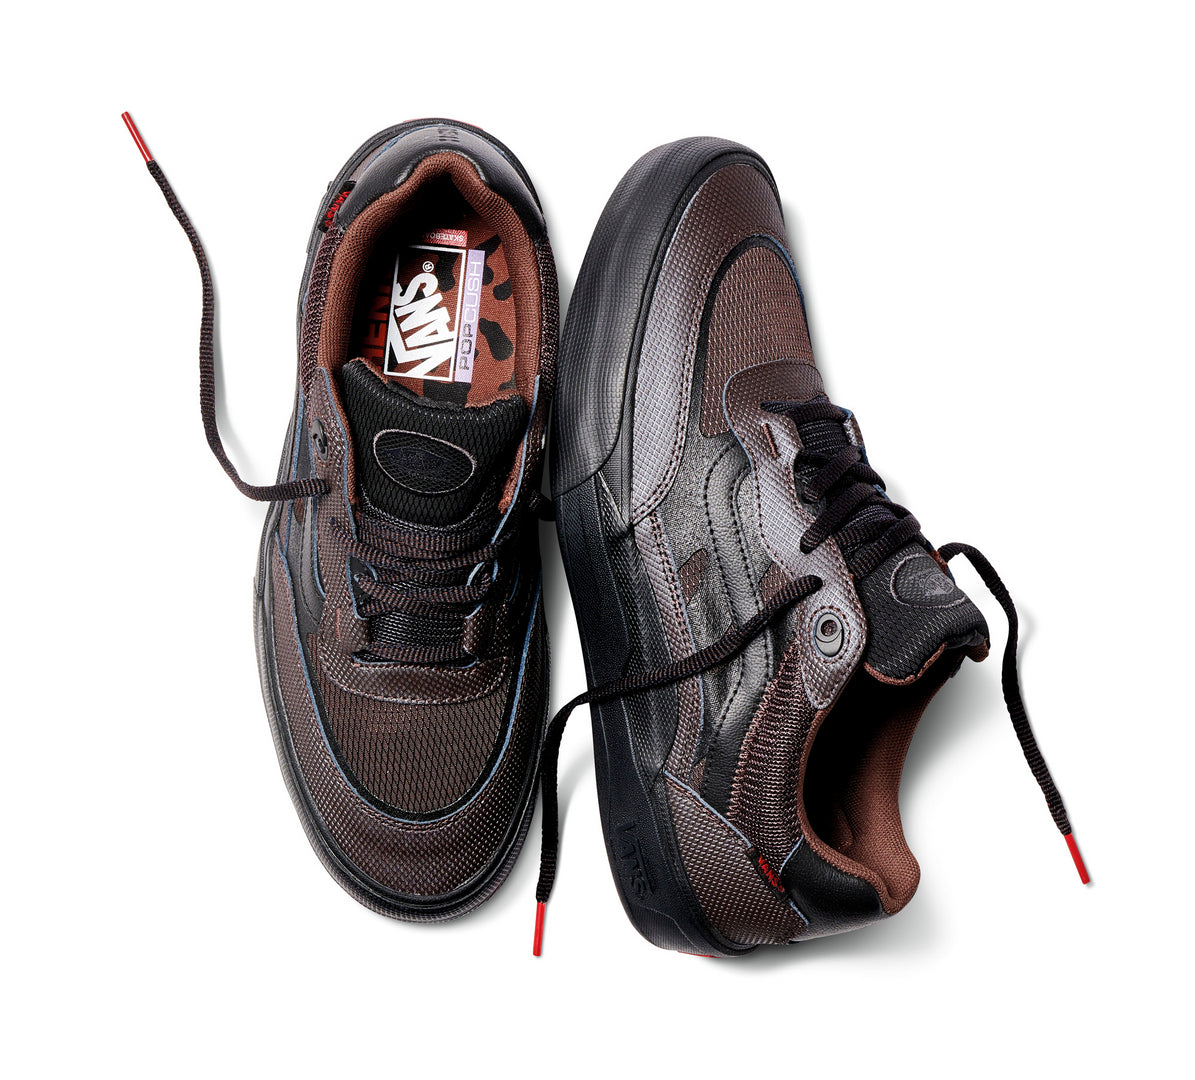 Justin Henry Wayvee Pro Shoe Coffee Bean (size options listed)